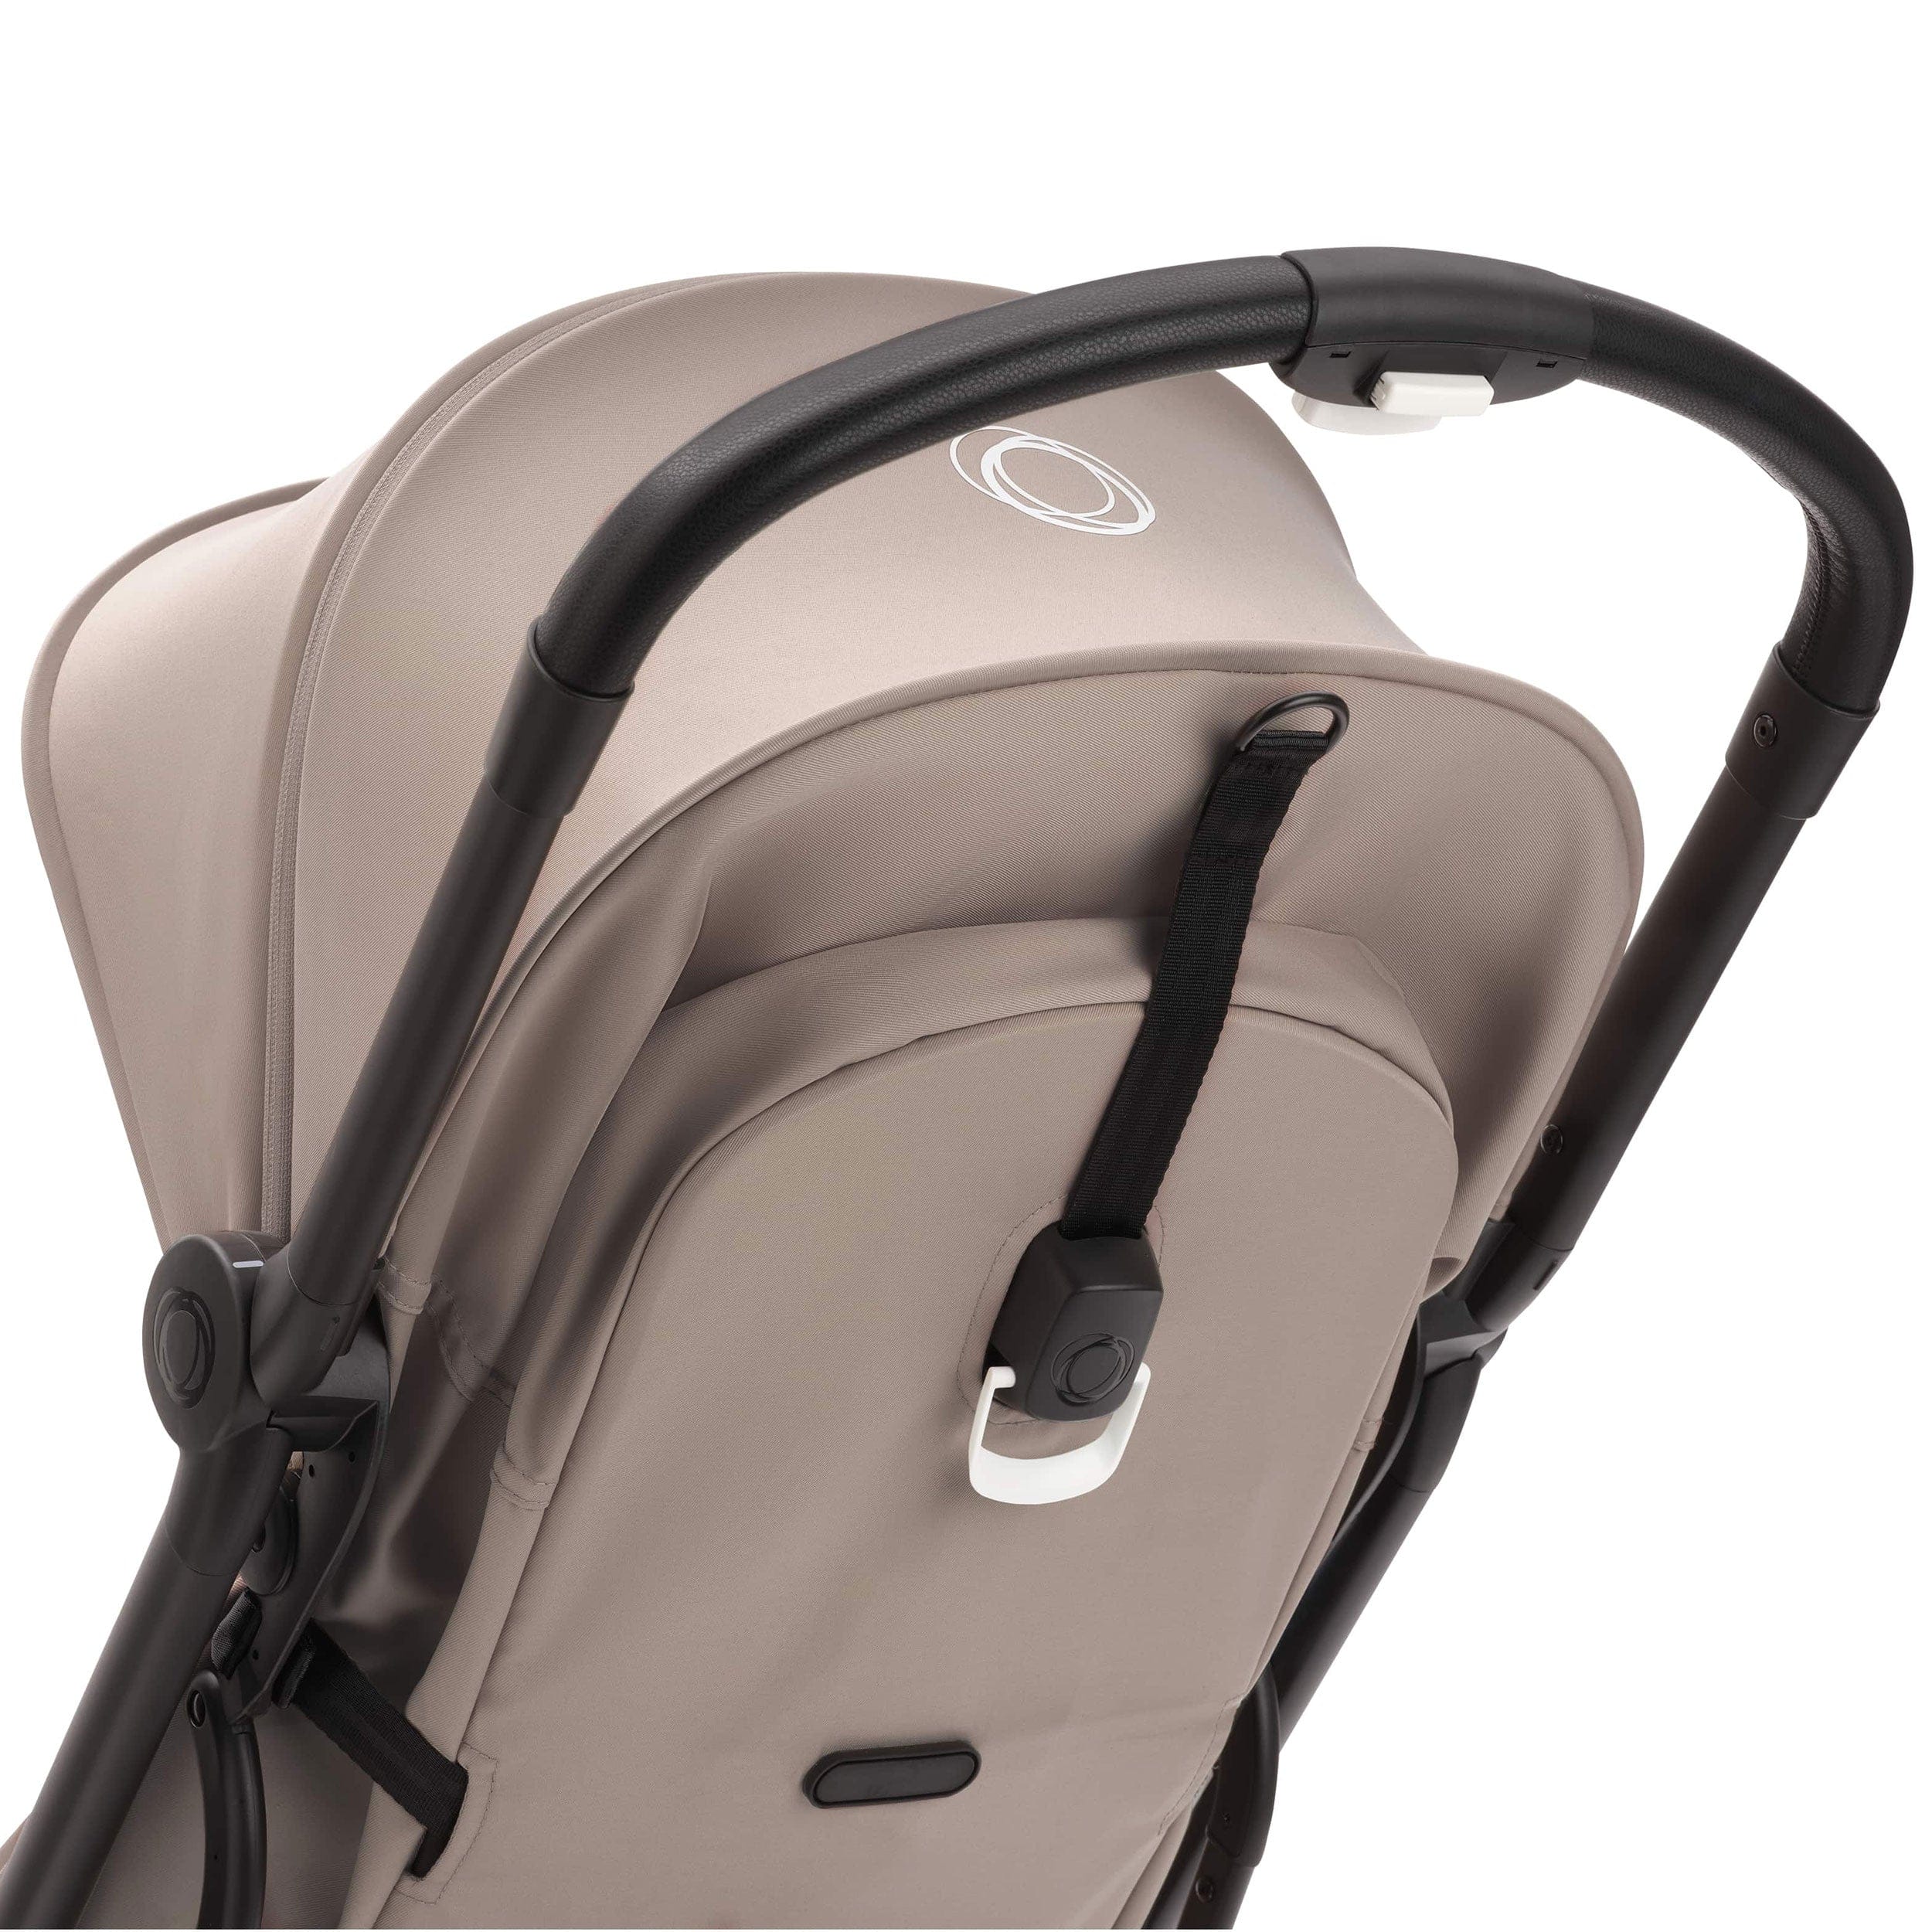 Bugaboo baby pushchairs Bugaboo Butterfly Compact Stroller - Desert Taupe 100025031